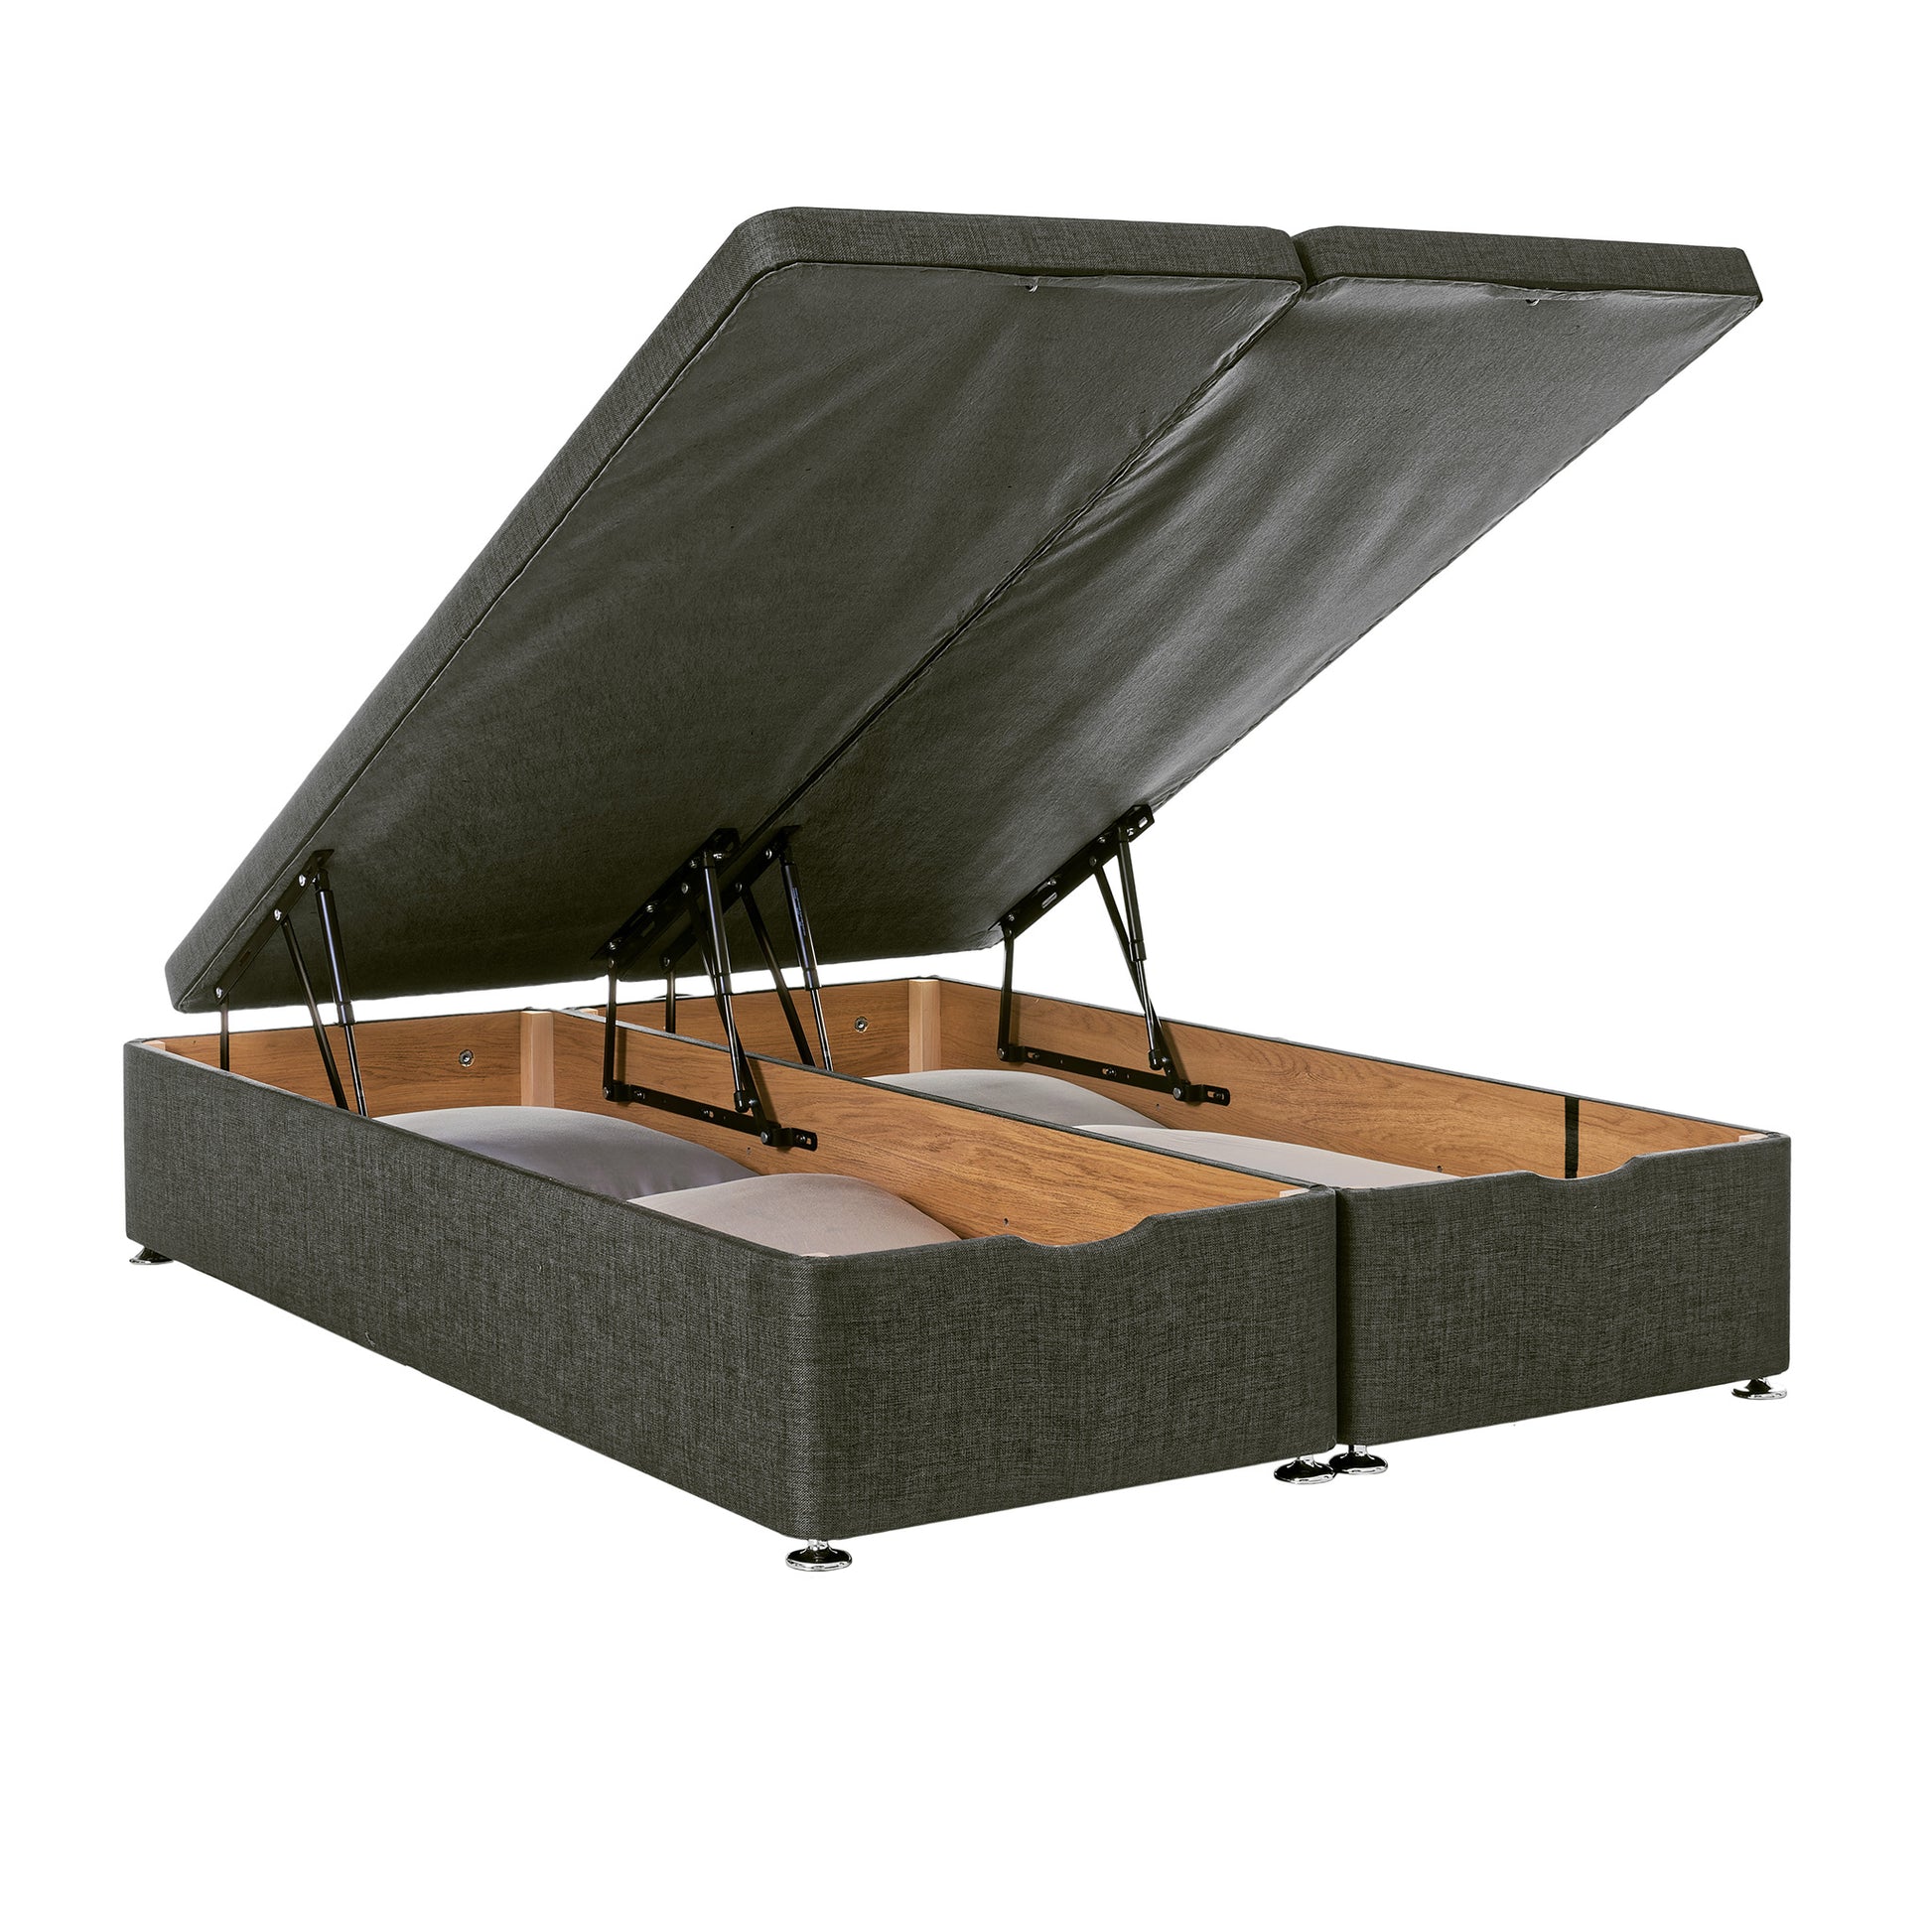 Airsprung End-Lift Double Charcoal Ottoman Open